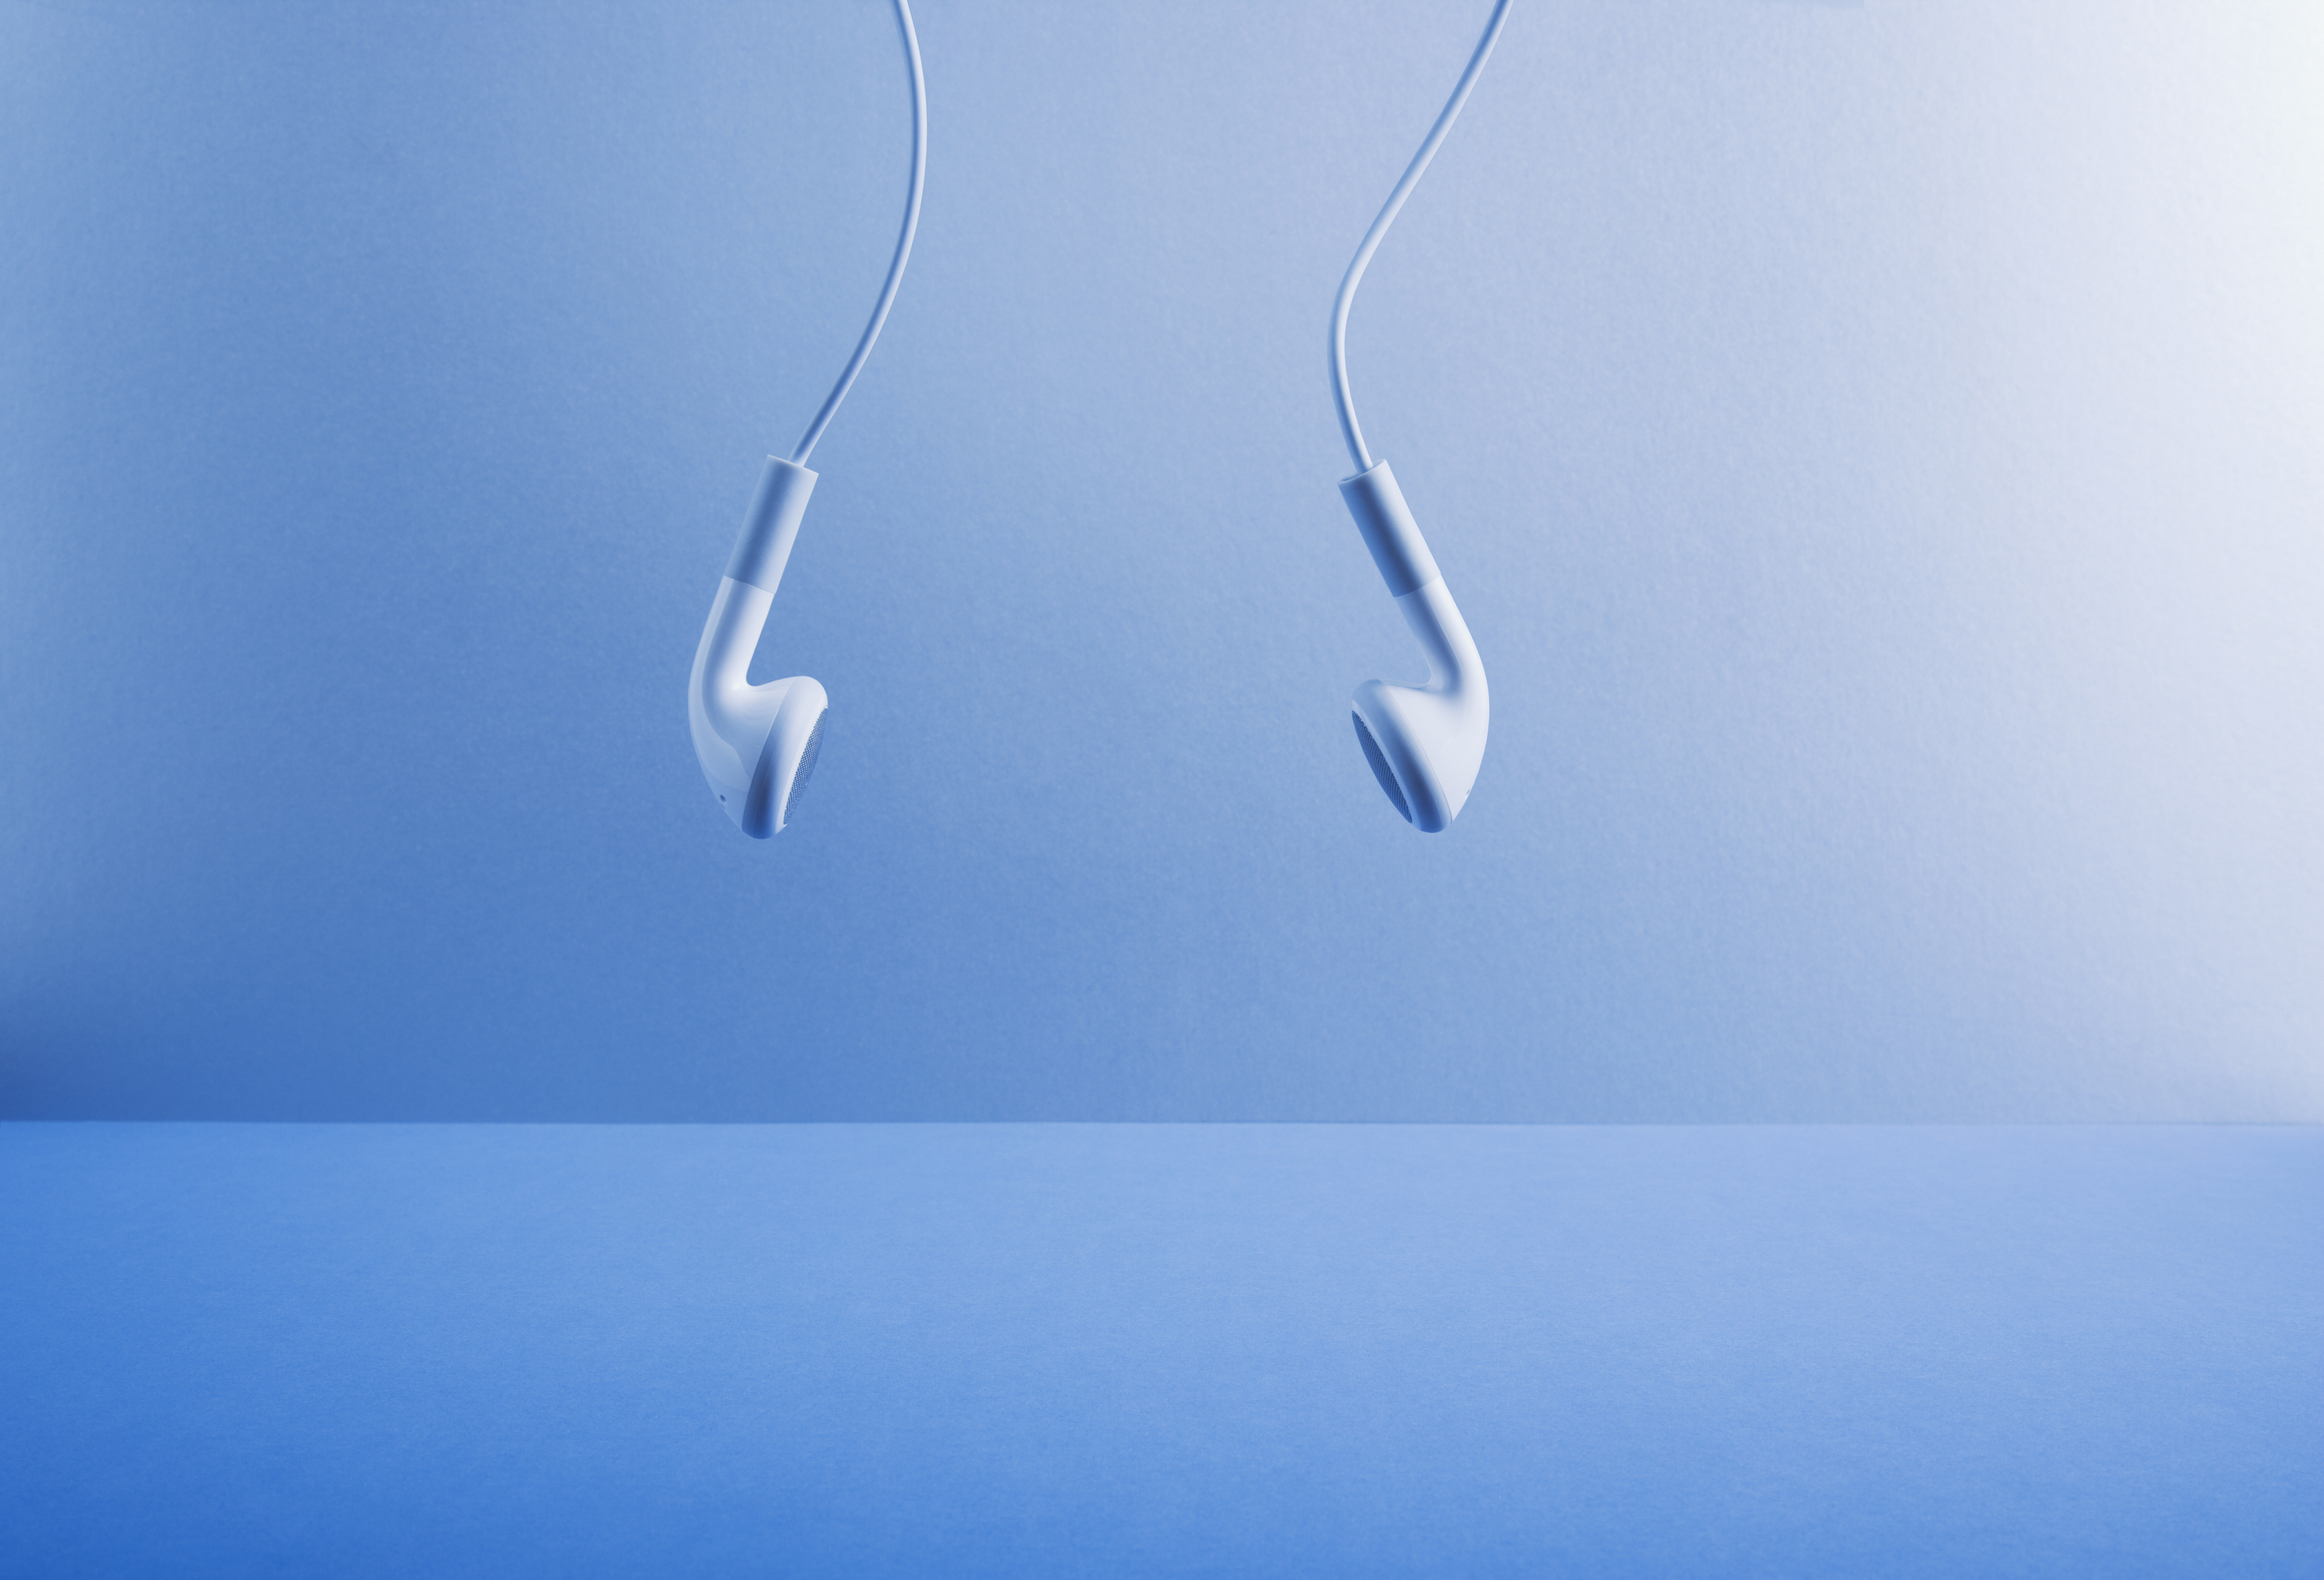 Image of a pair of white headphones hanging against a blue background.